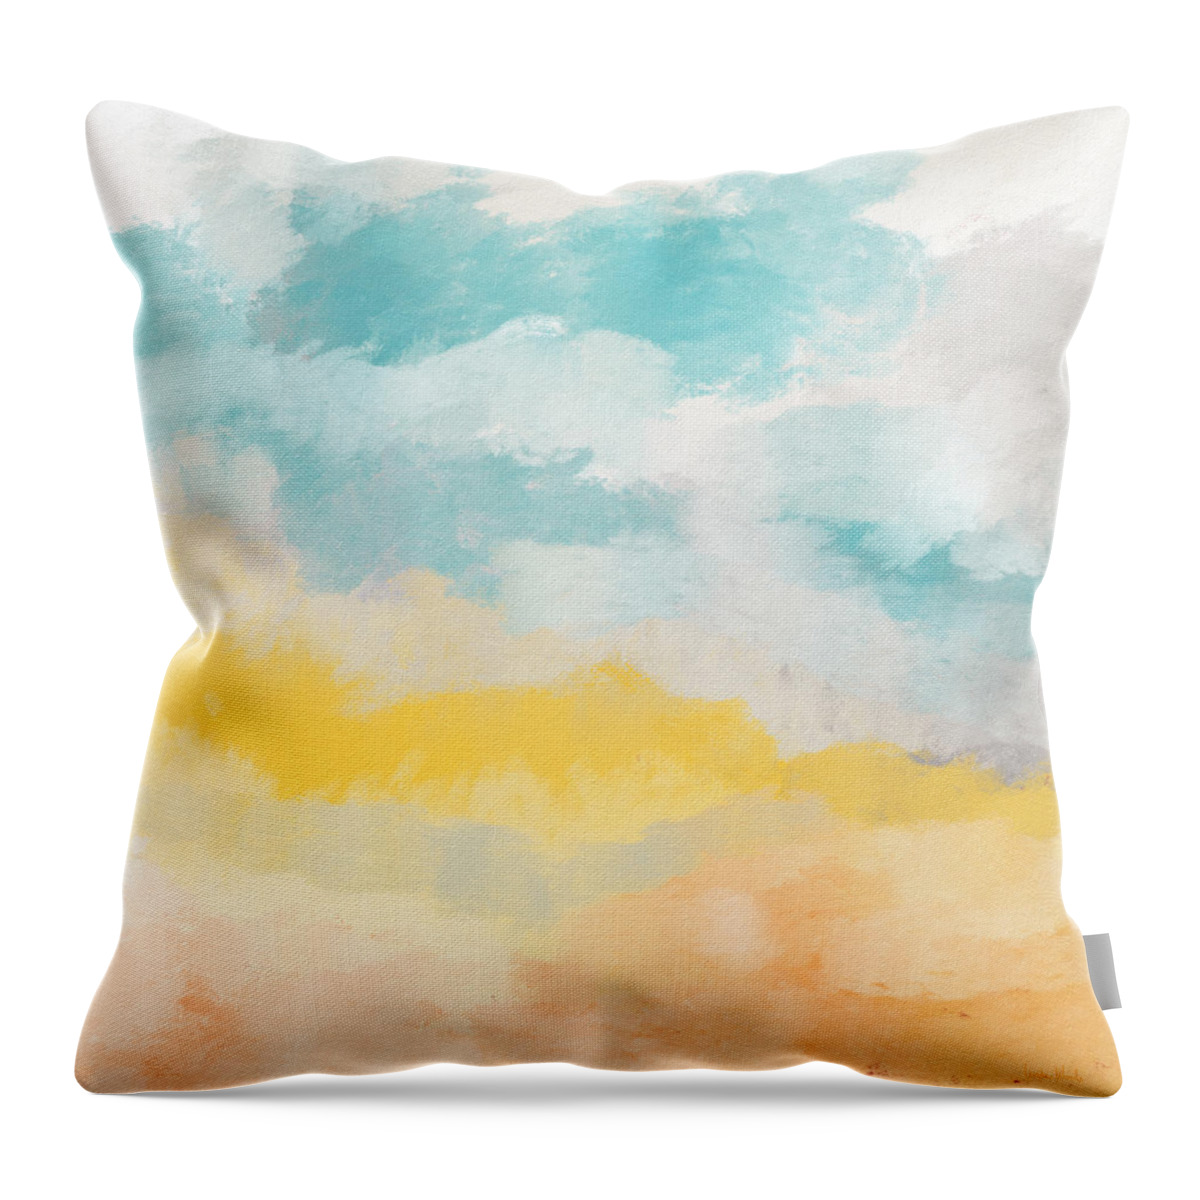 Landscape Throw Pillow featuring the mixed media Sunshine Day- Art by Linda Woods by Linda Woods